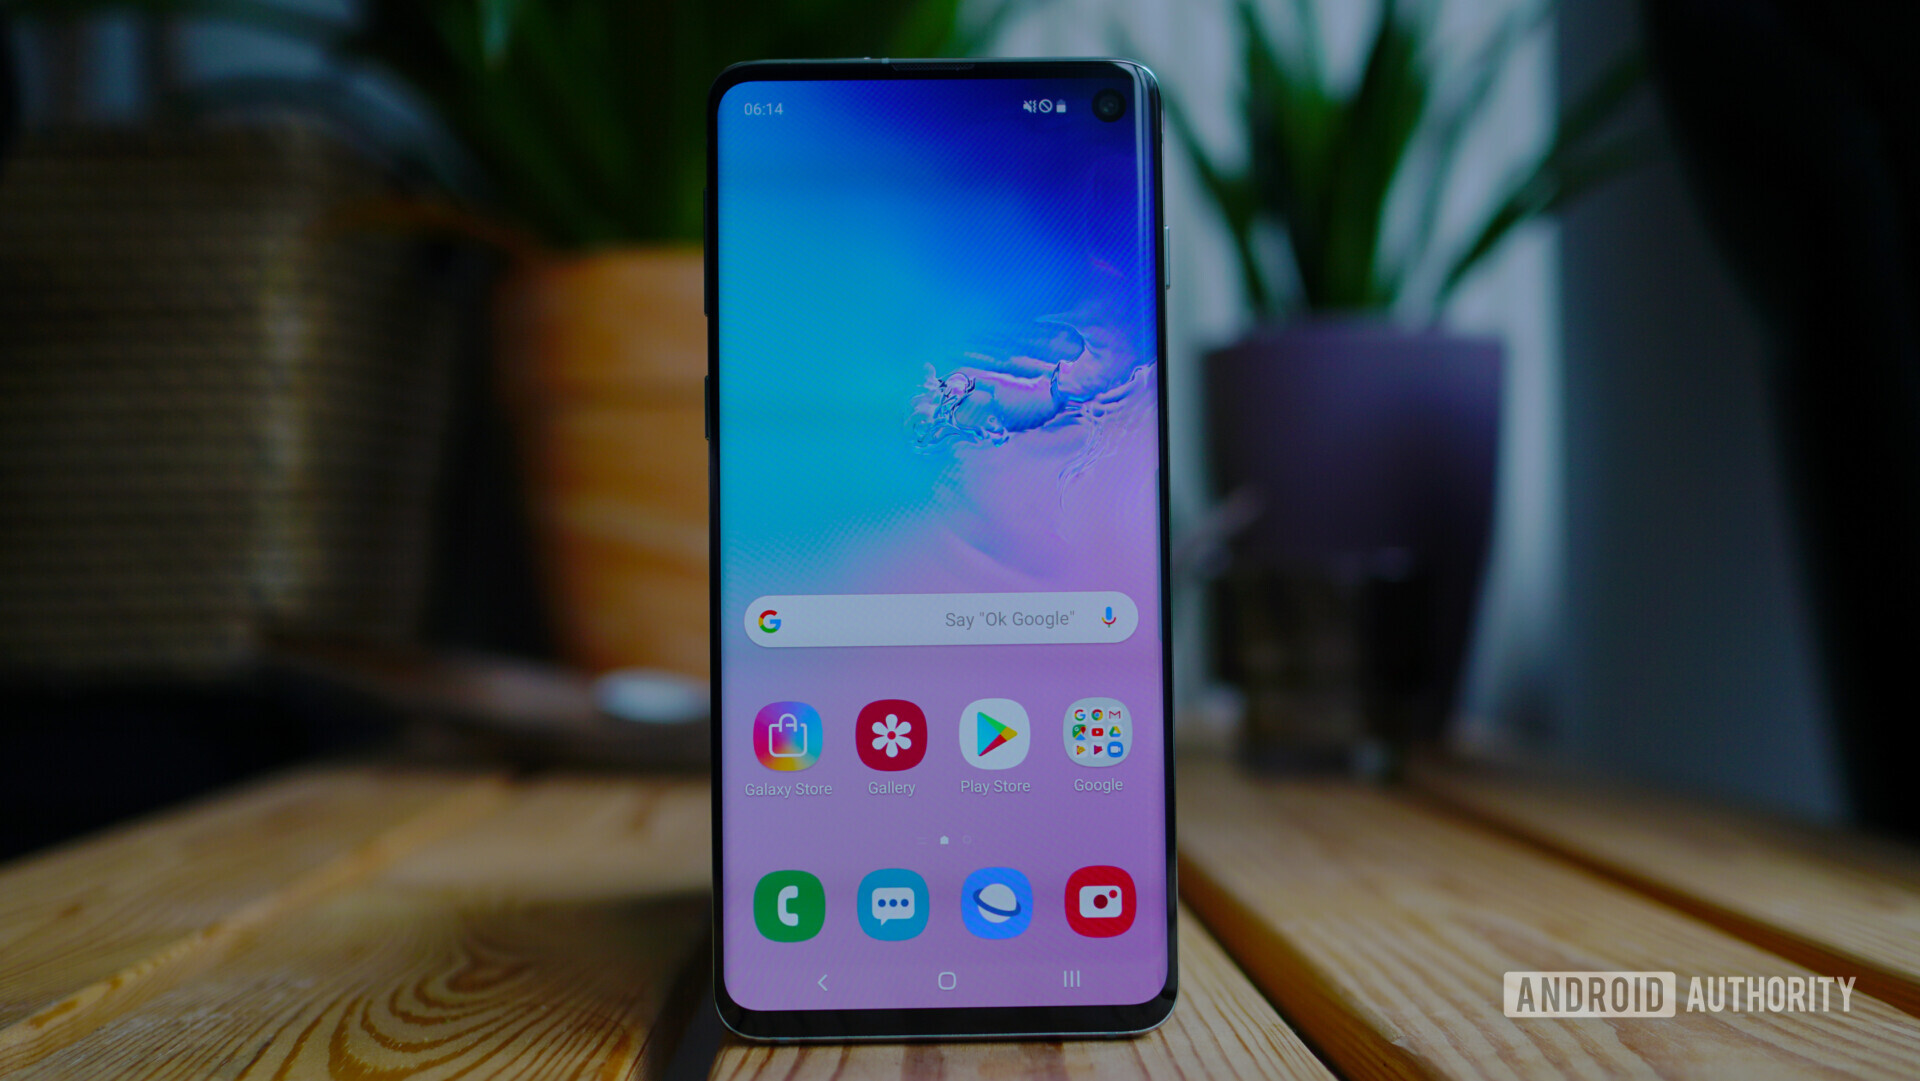 Samsung is firmly leading the way for shipments in Q2 2019.